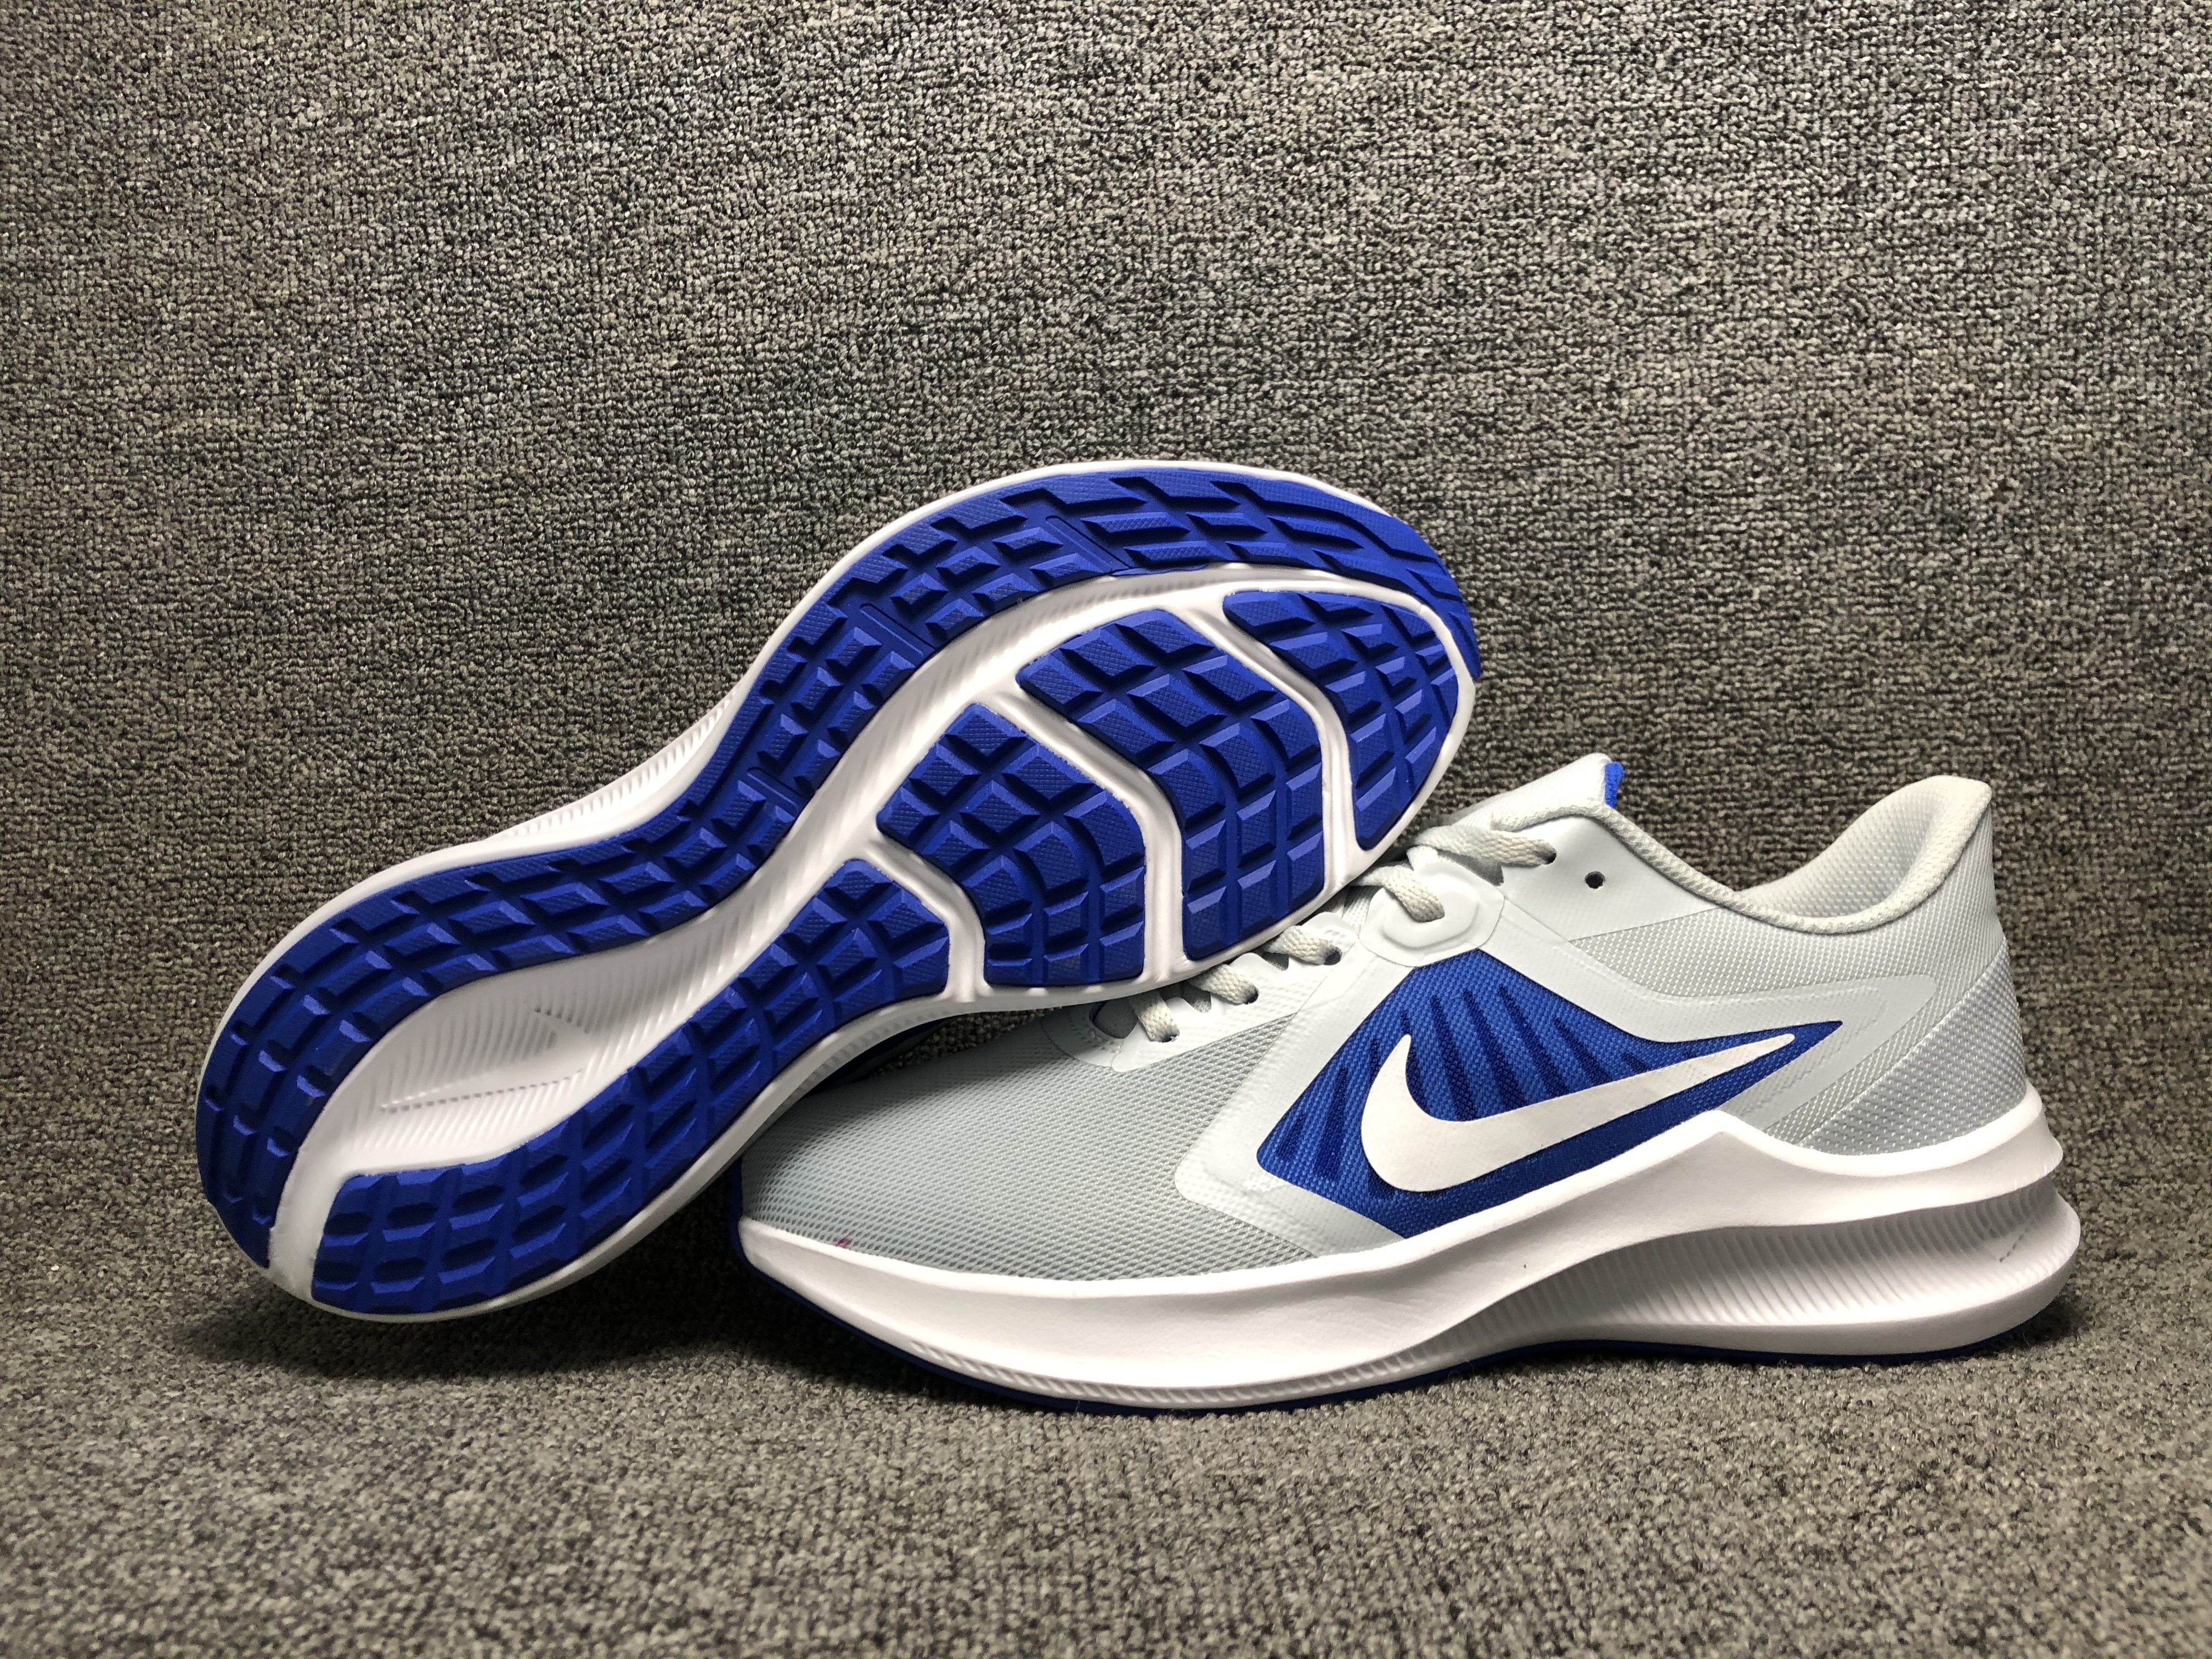 2020 Nike Quest III White Grey Blue Running Shoes